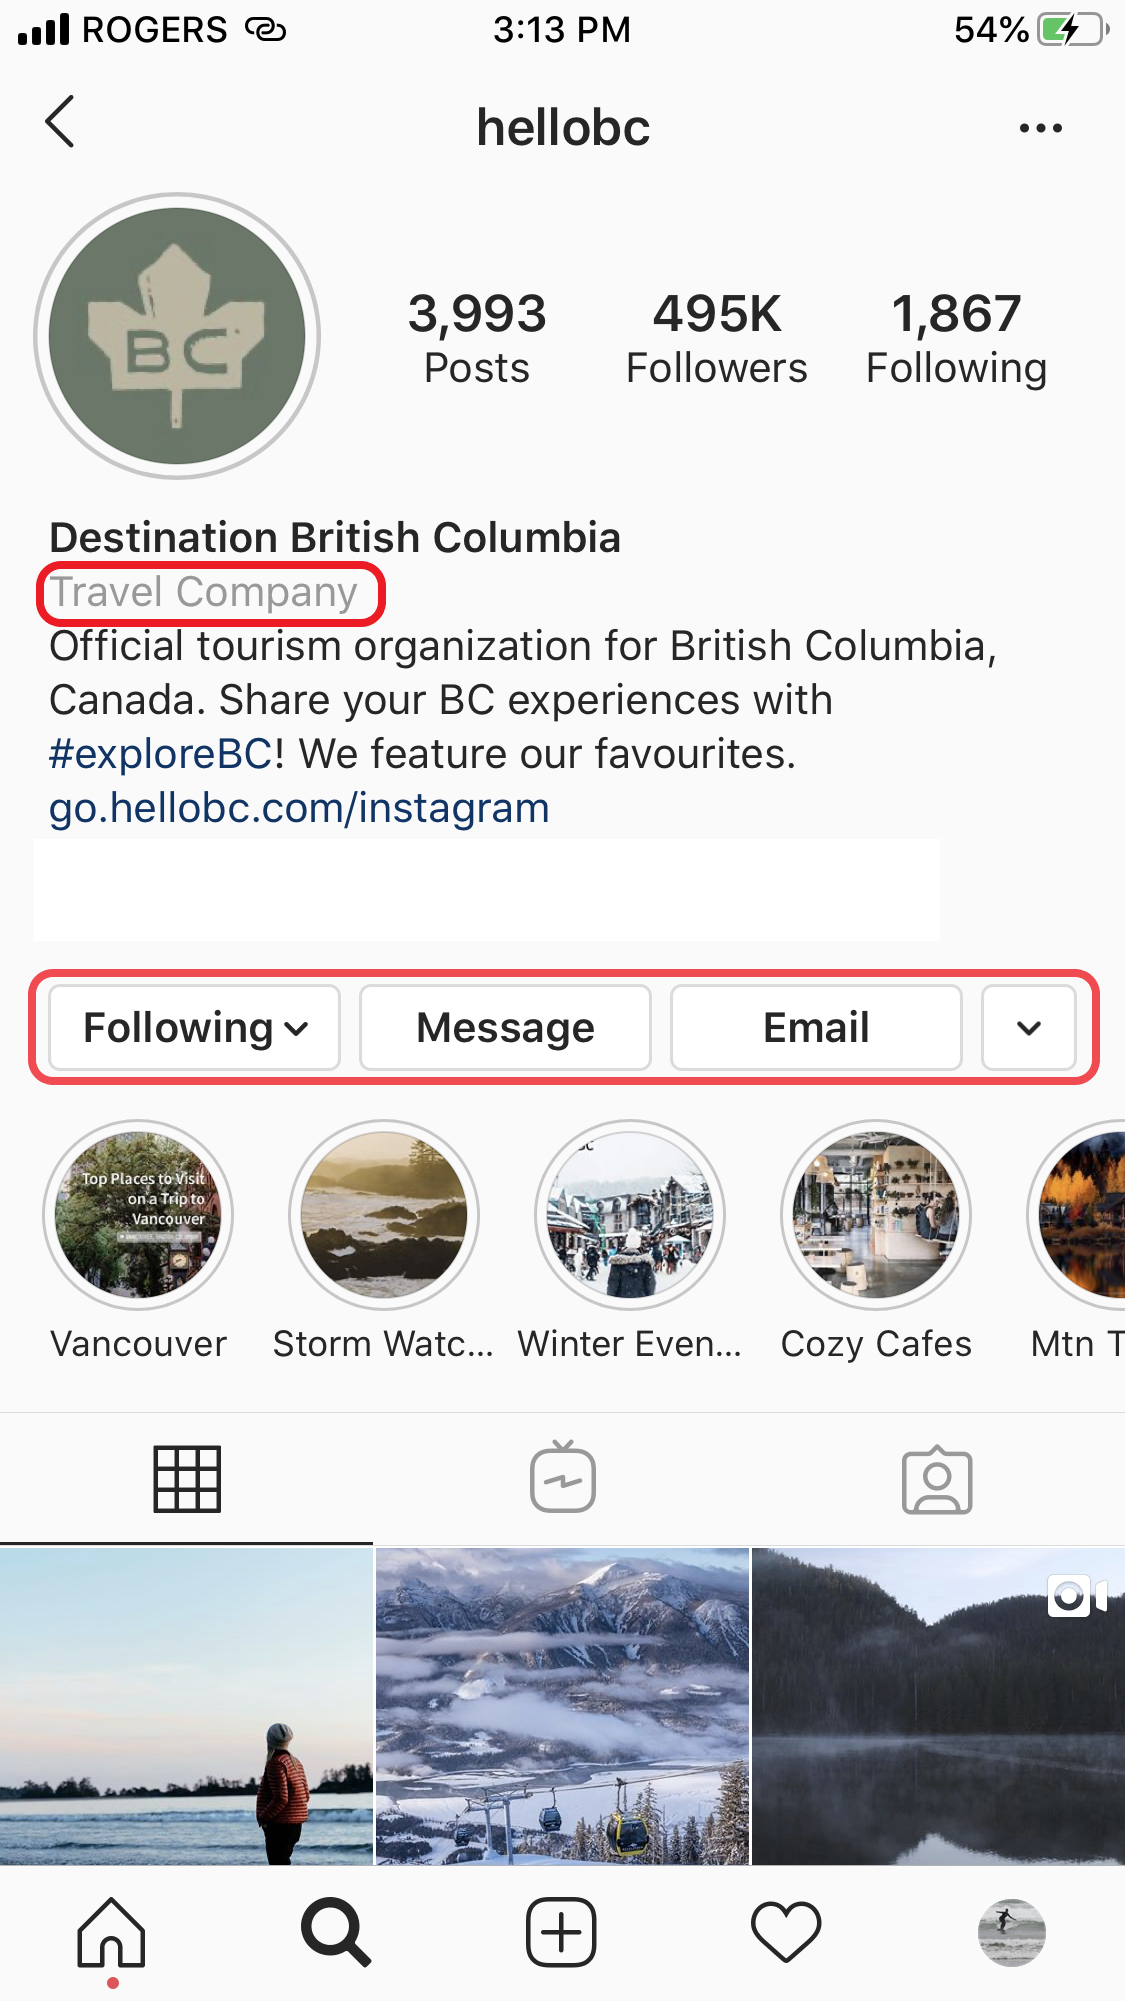 Screenshot of DBC's Instagram account, with the title "Travel Company" diplayed.